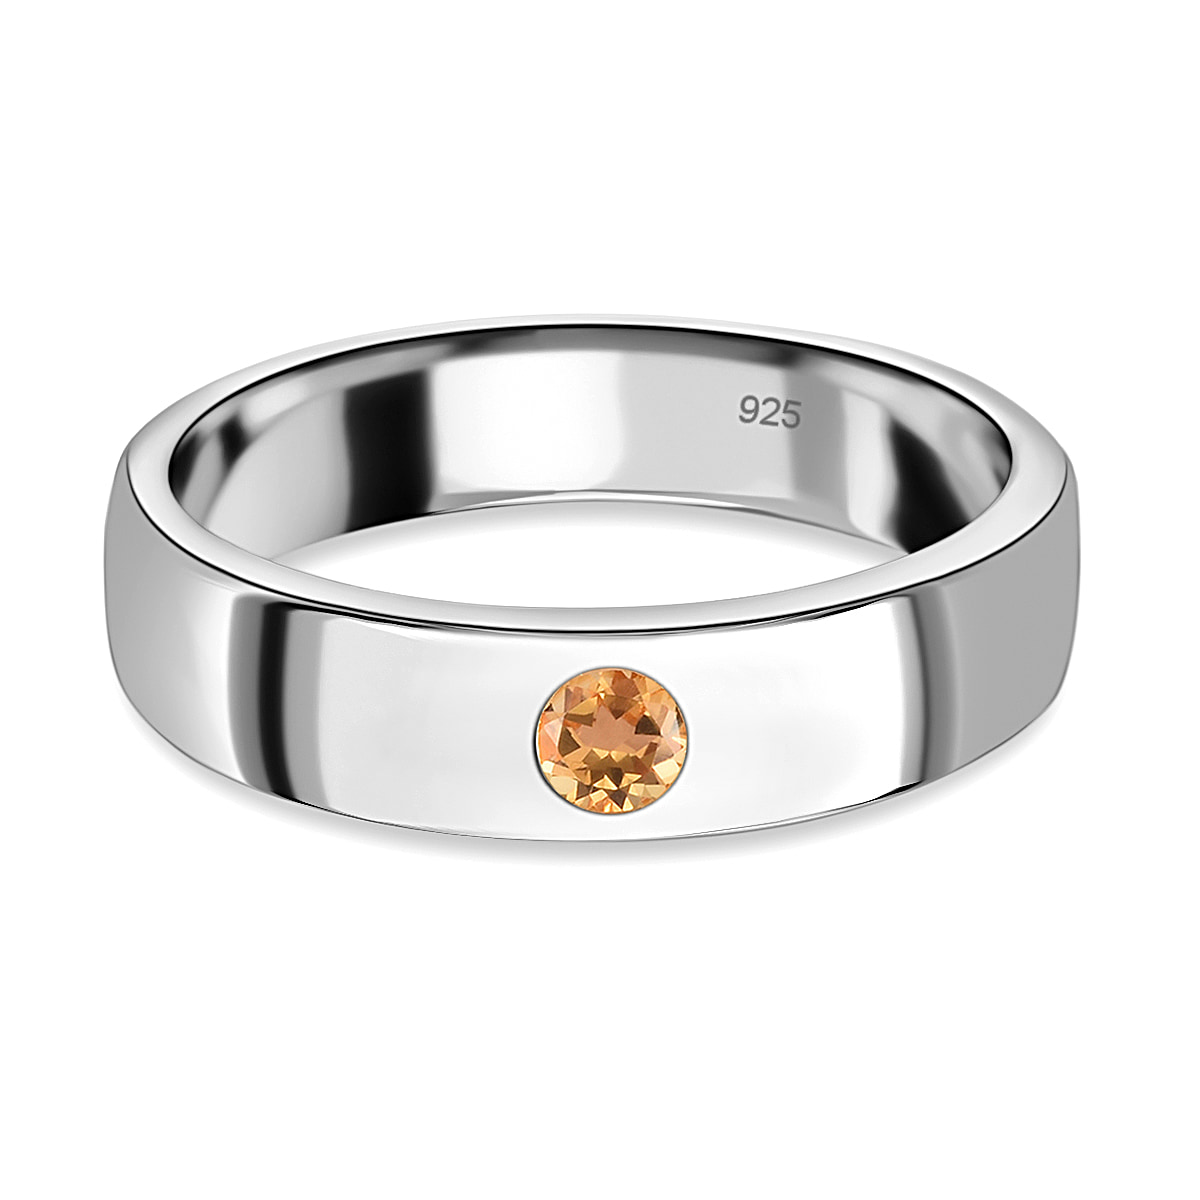 Citrine Solitaire Wedding Band Ring in Platinum Plated Sterling